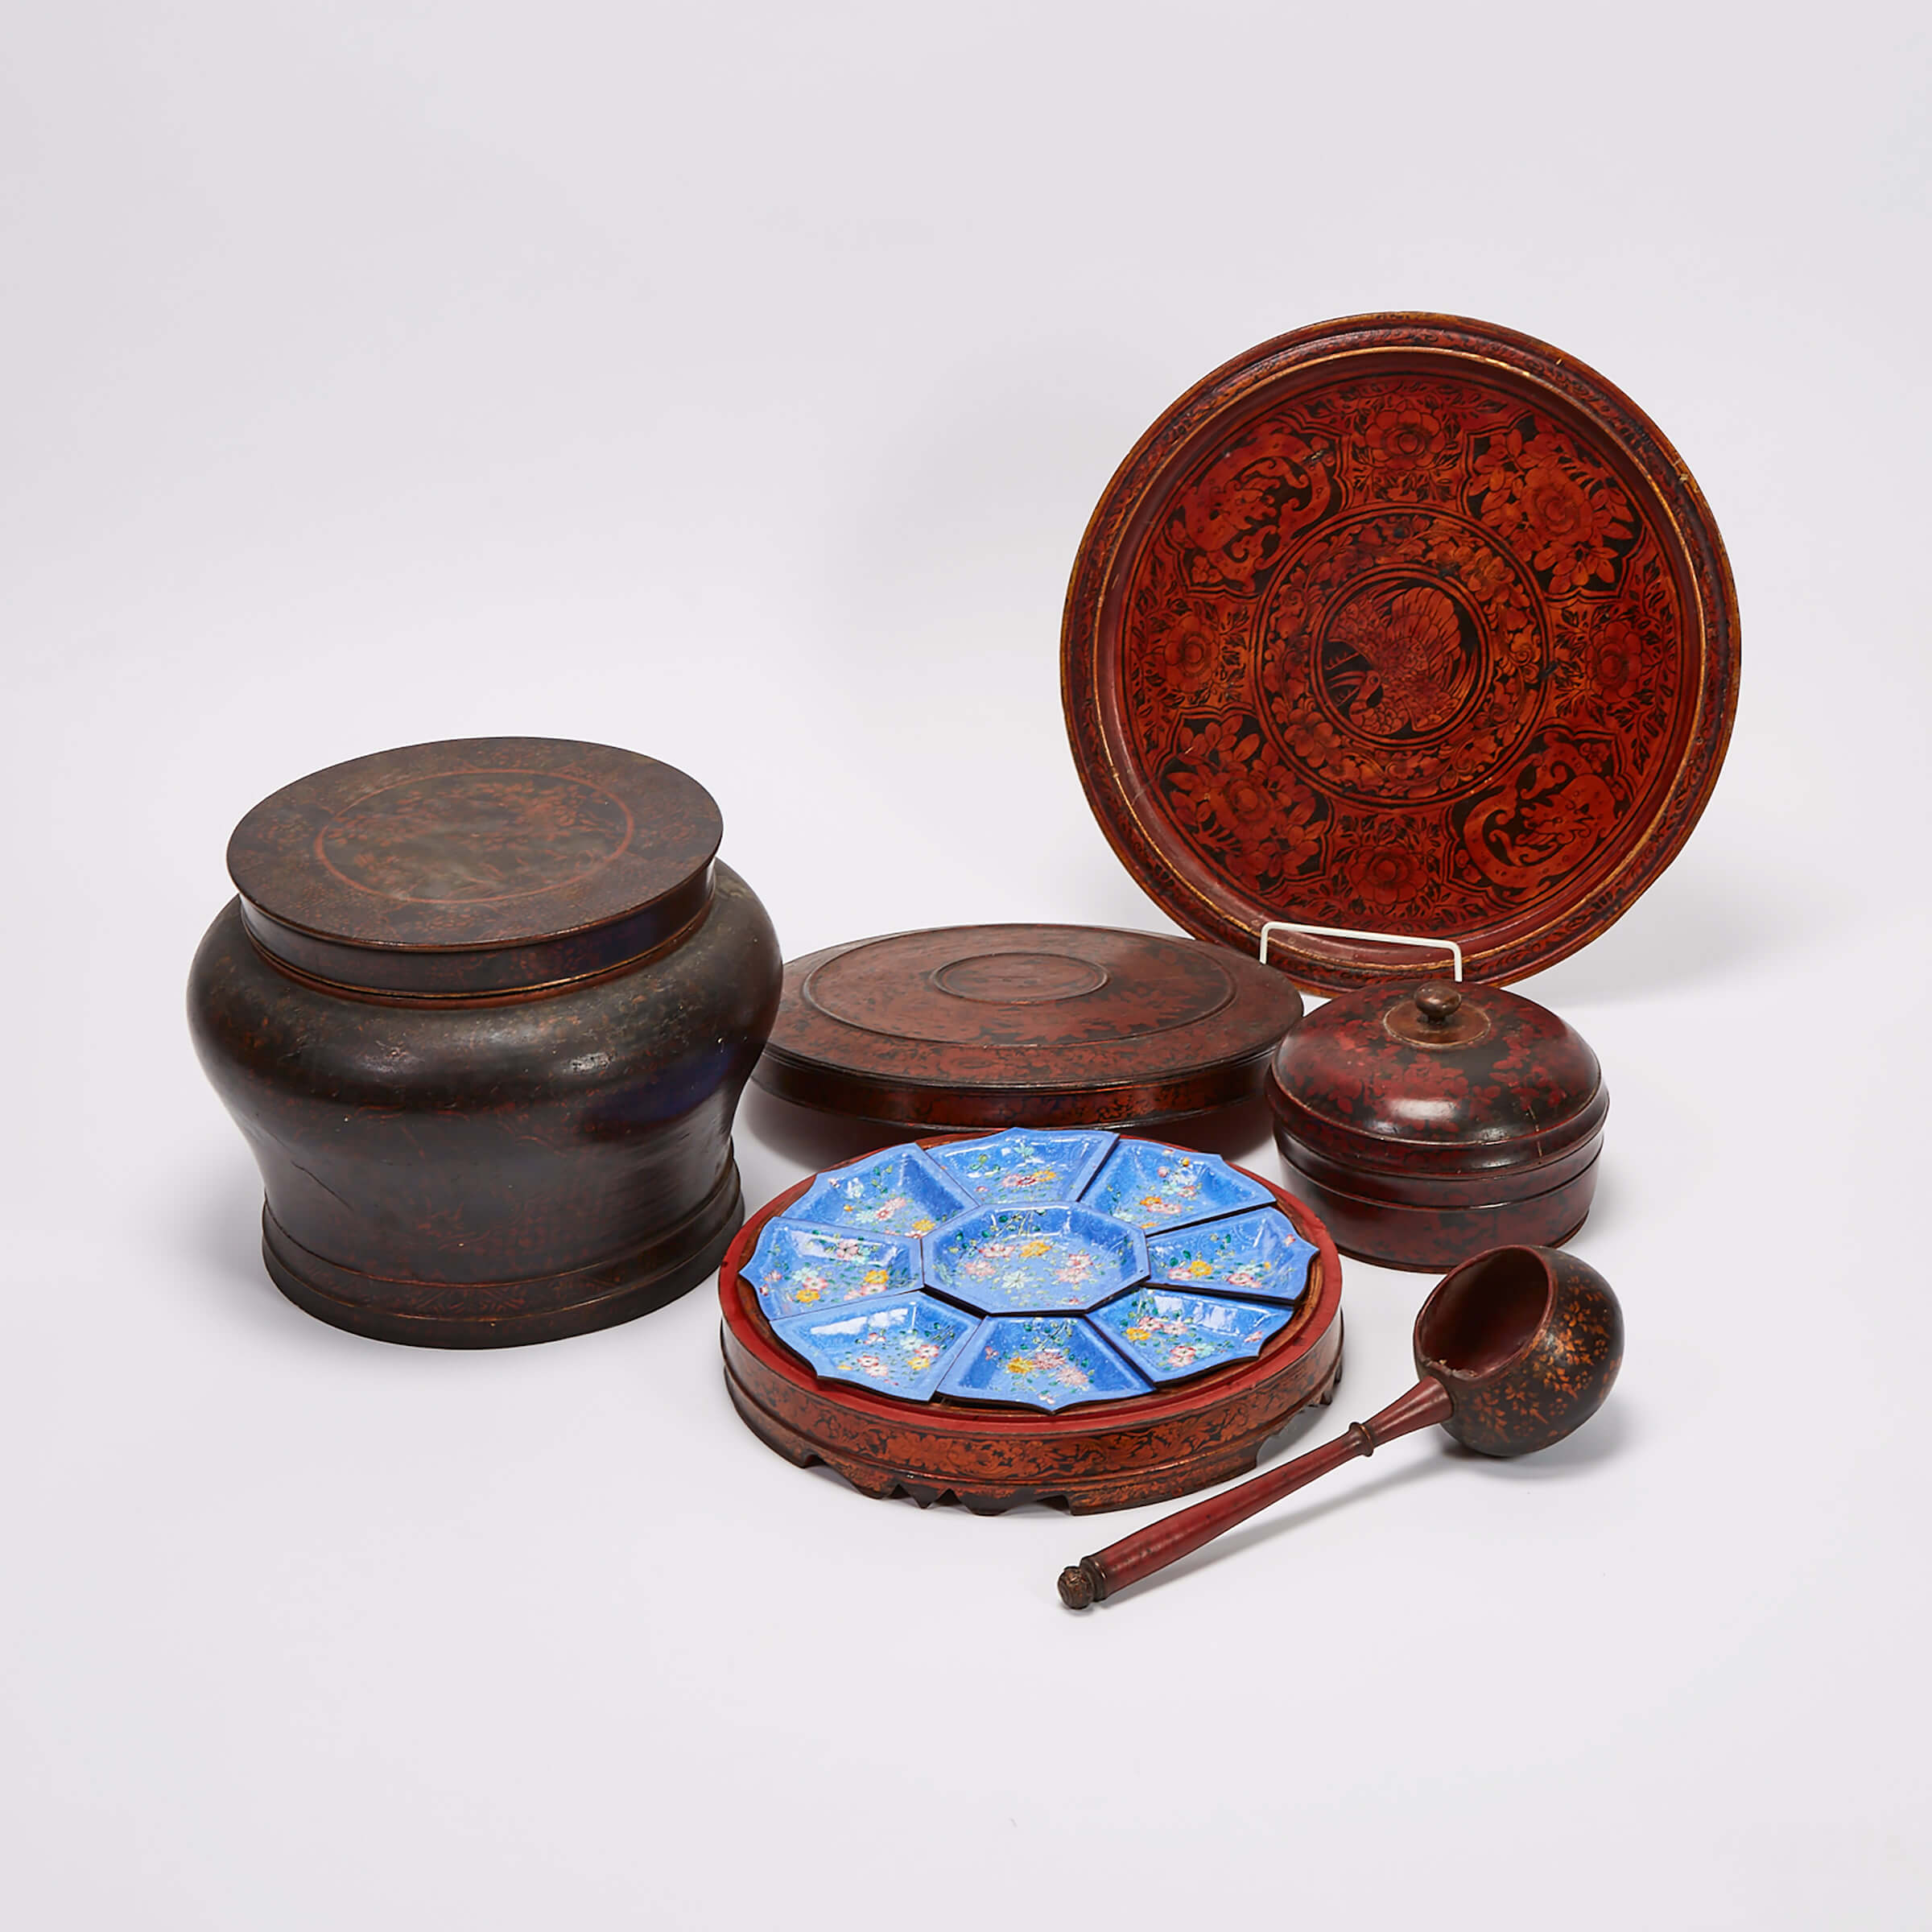 A Group of Four Lacquerware, India, Early 20th Century